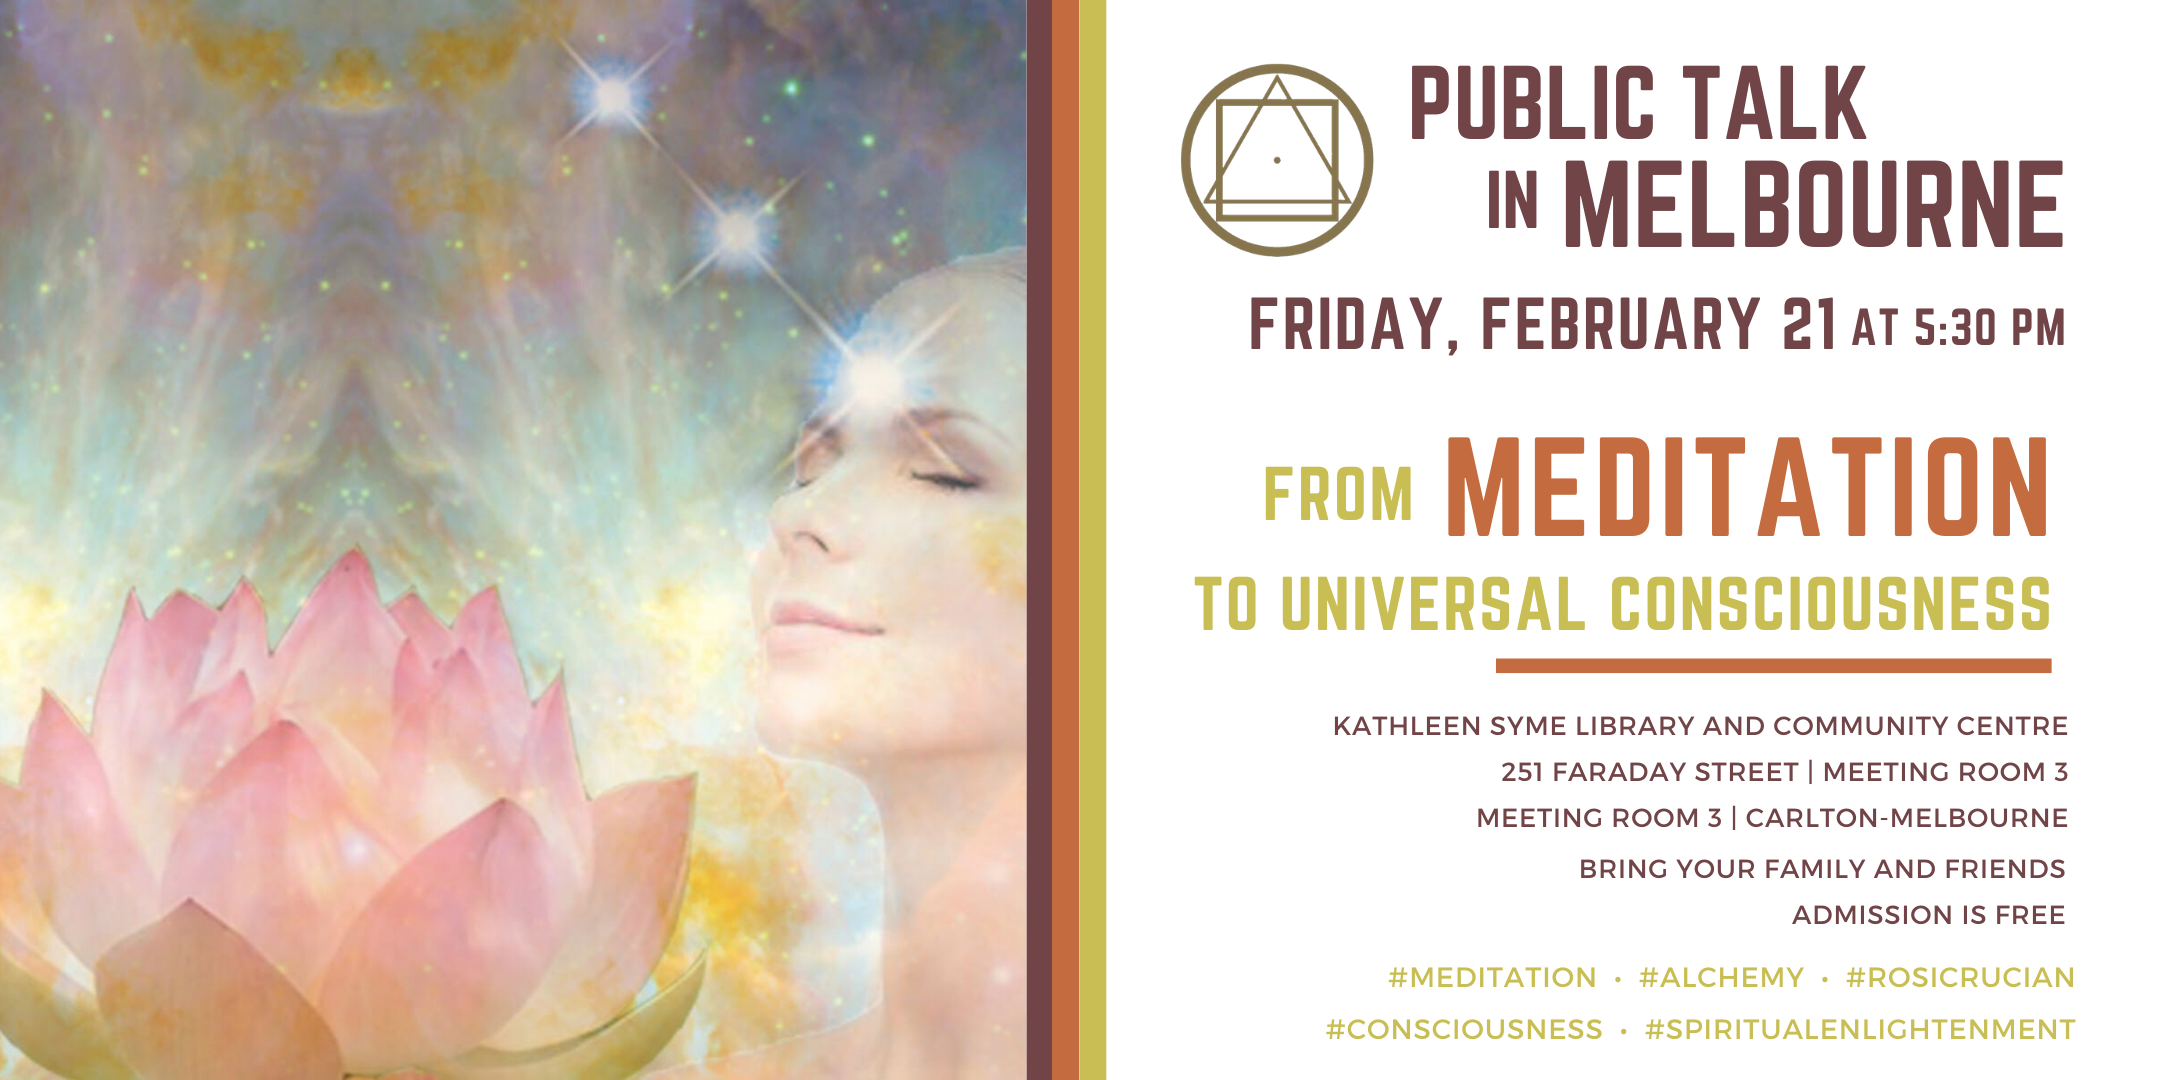 Public Talk in Melbourne - From Meditation to Universal Consciousness